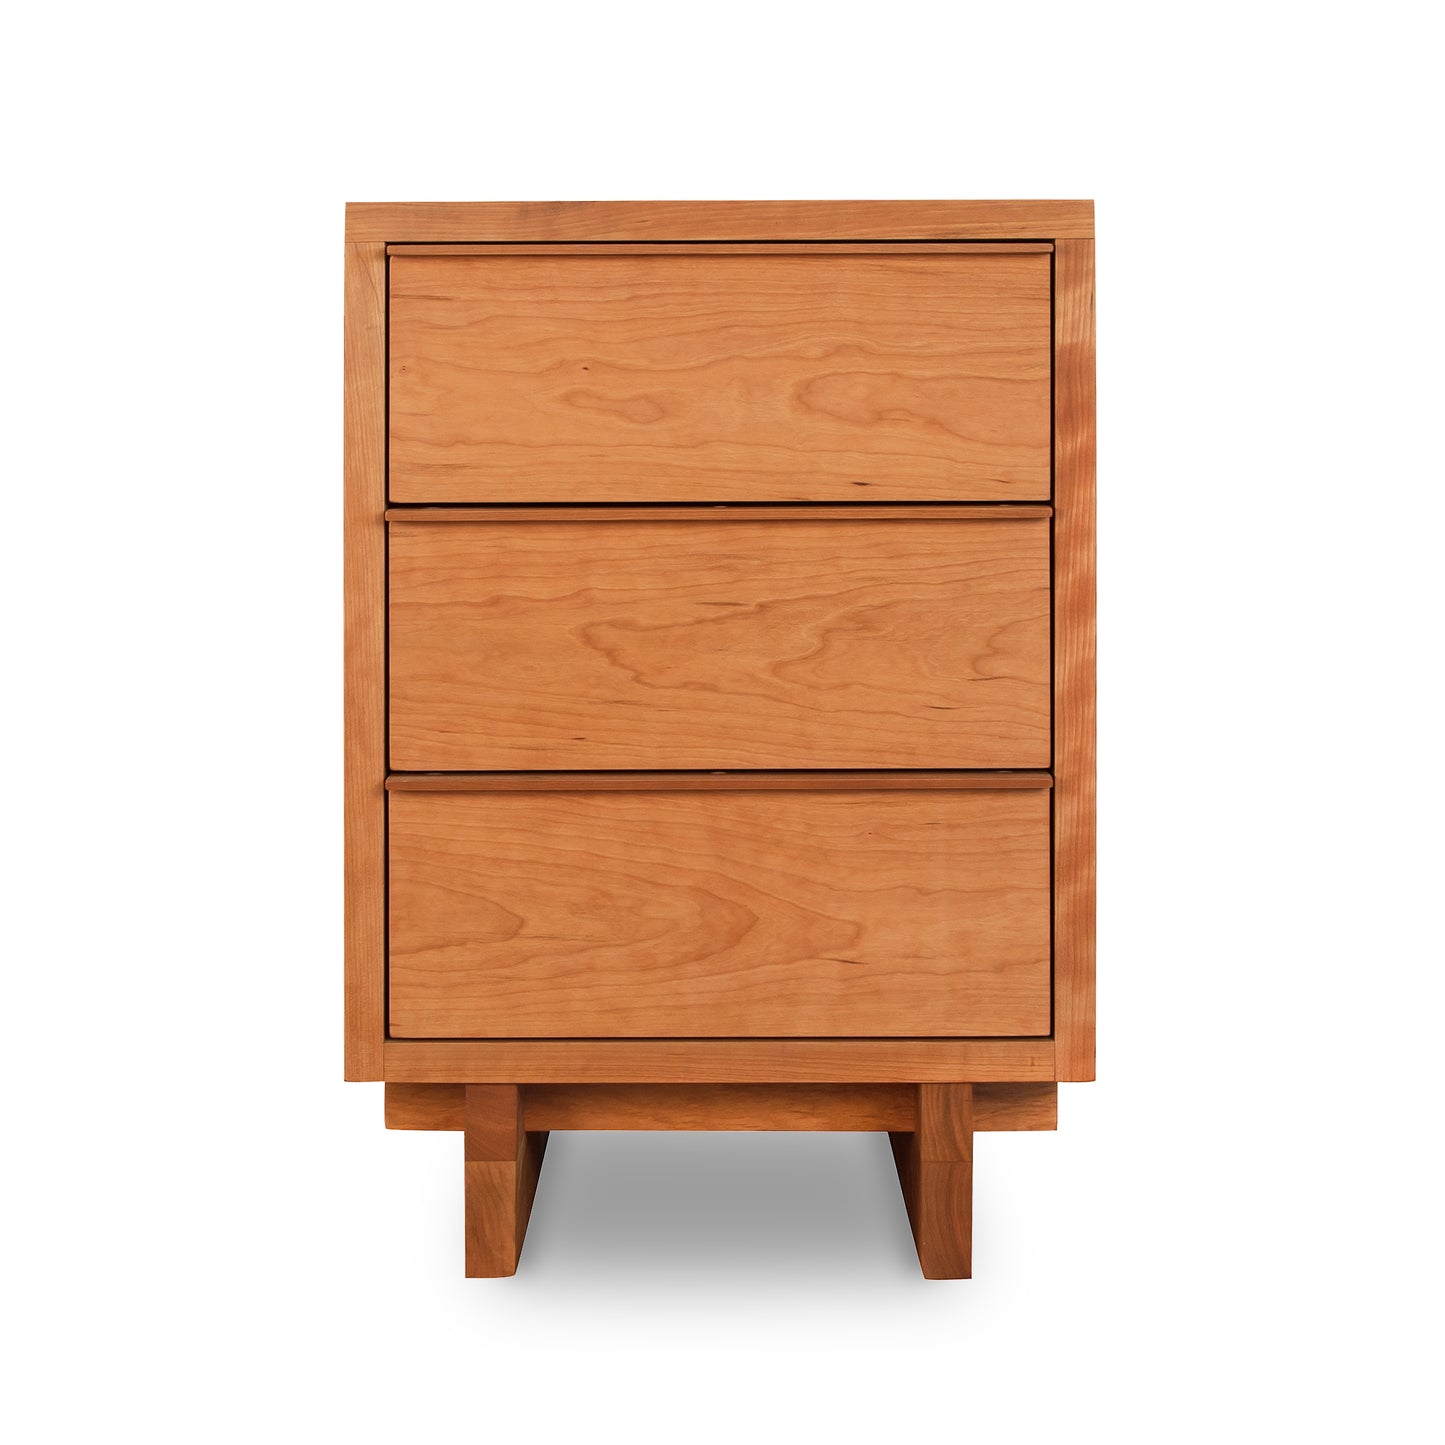 A modern design Vermont Furniture Designs Kipling 3-Drawer Nightstand in natural cherry against a white background.